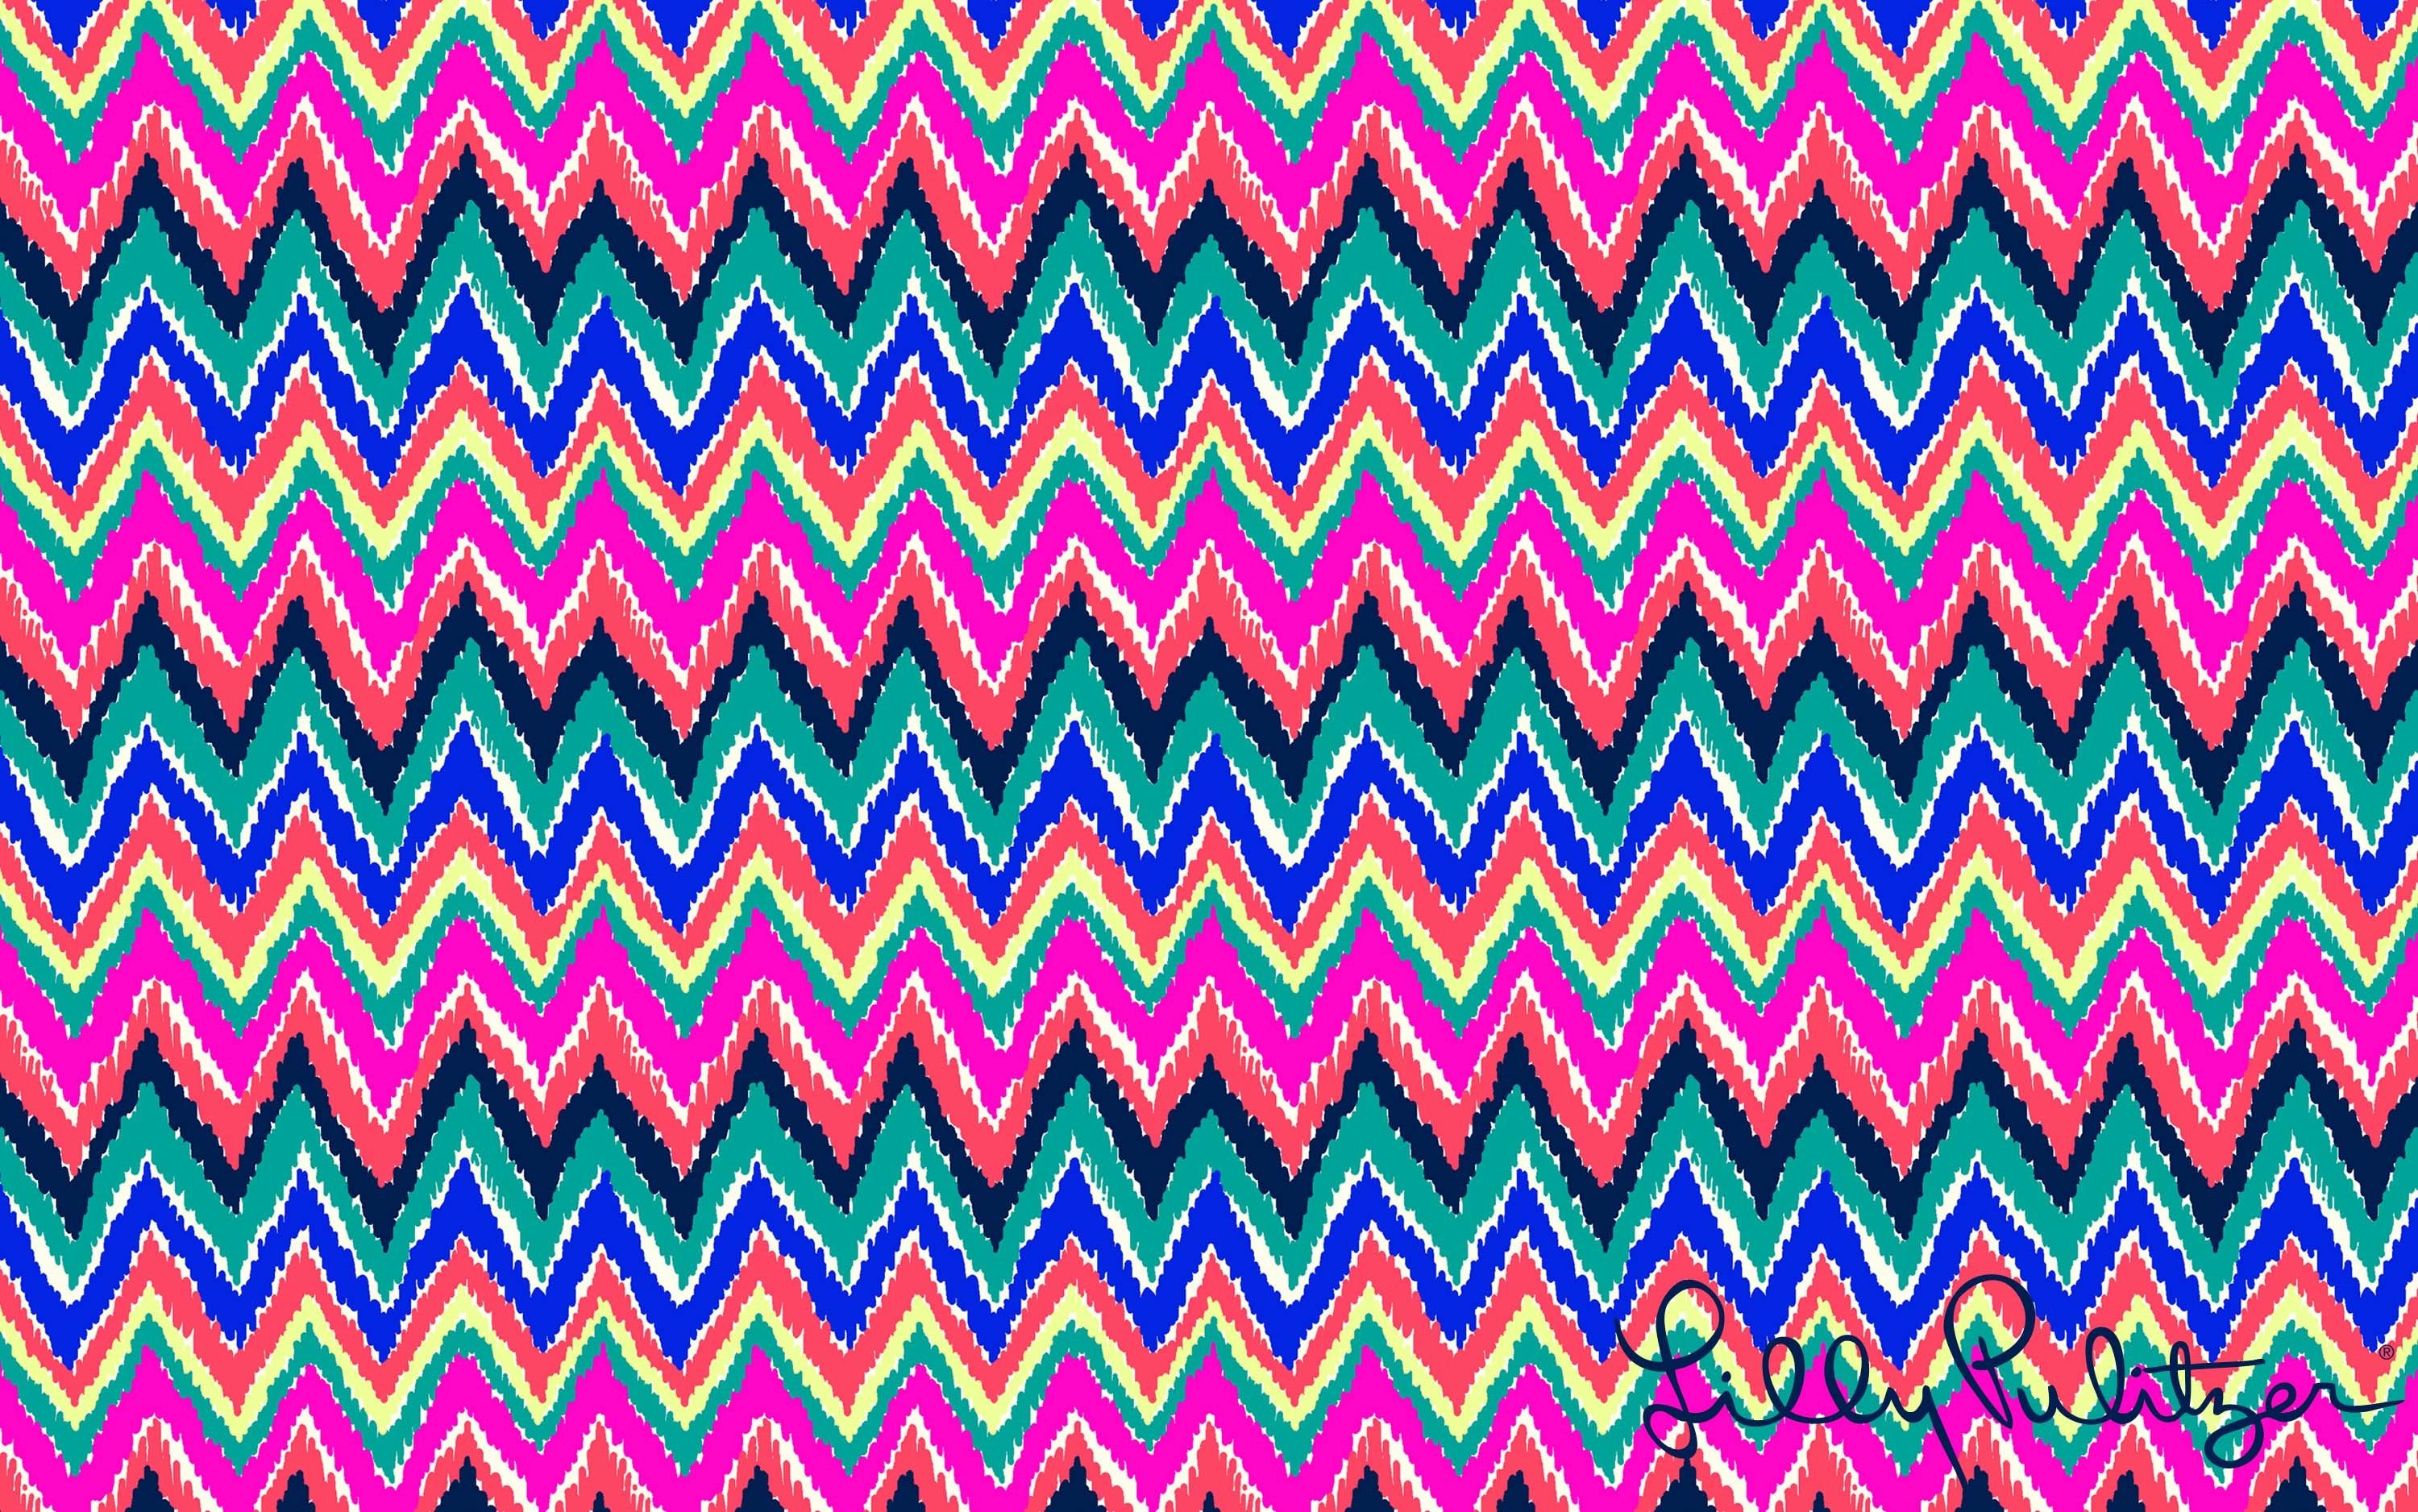 3000x1876 anchor background aÂ·a' download free awesome hd wallpapers for. 2880x1800 a  cute simple lilly pulitzer ...